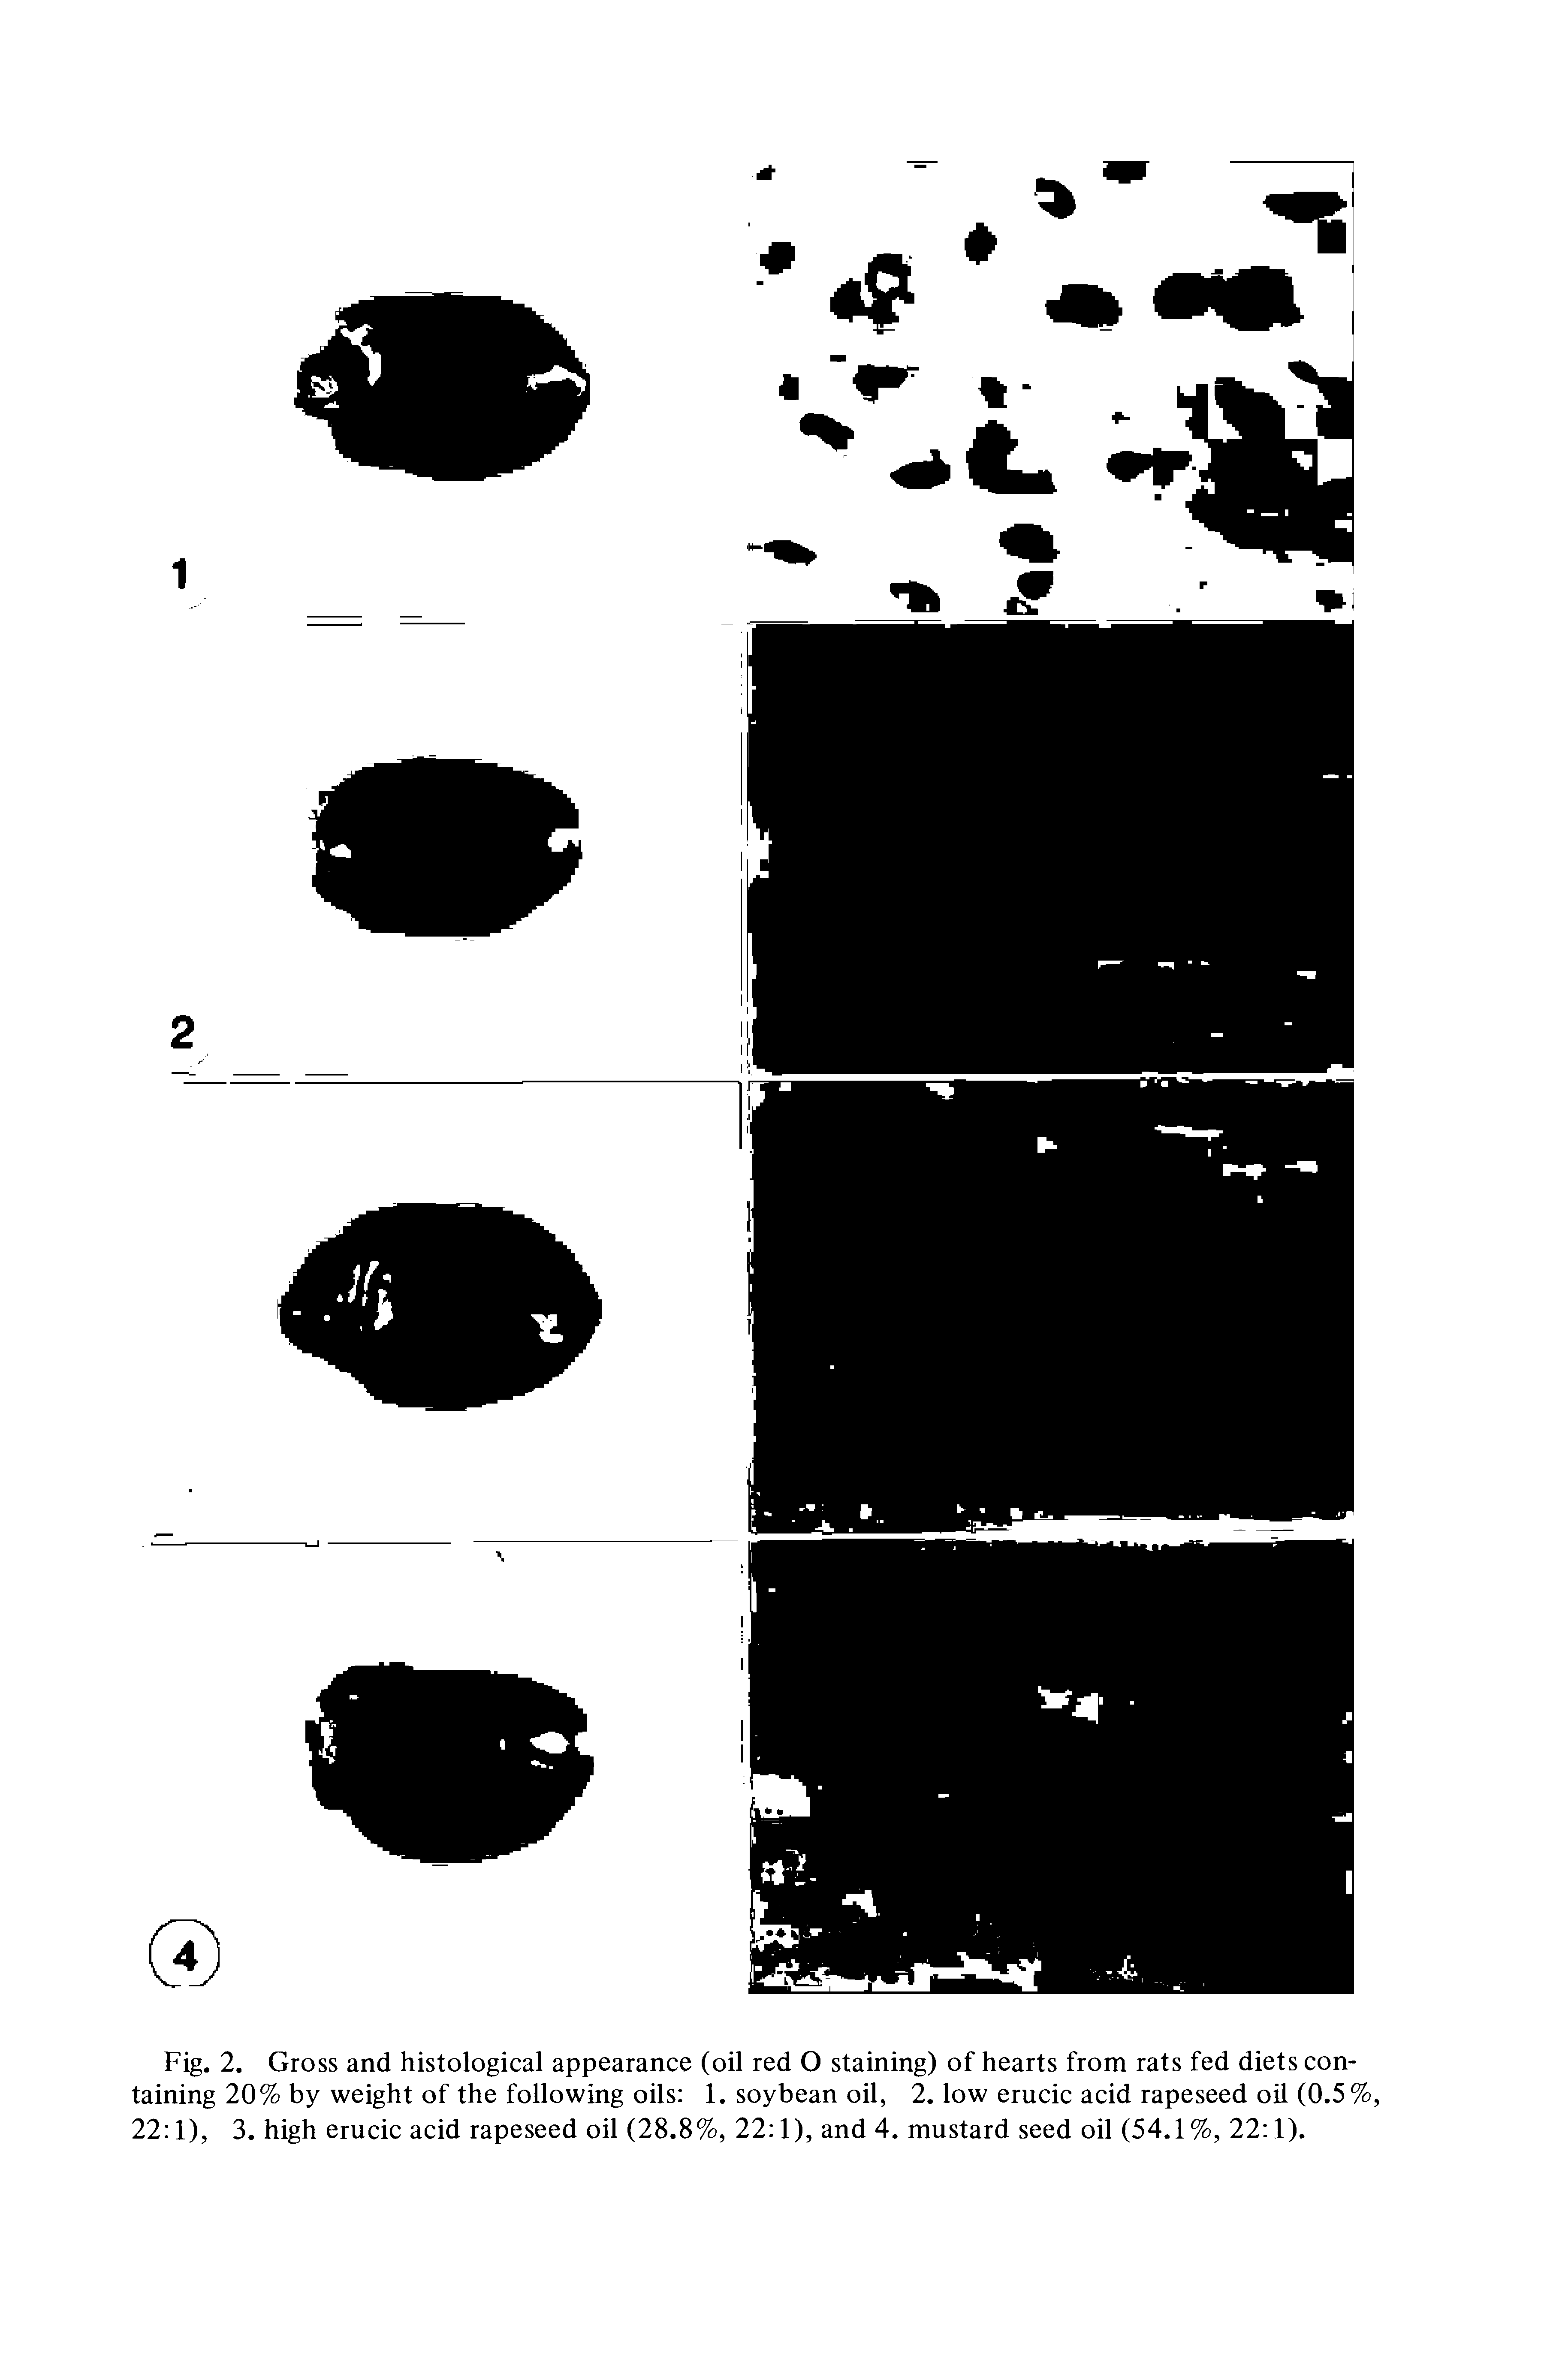 Fig. 2. Gross and histological appearance (oil red O staining) of hearts from rats fed diets containing 20% by weight of the following oils 1. soybean oil, 2. low erucic acid rapeseed oil (0.5% 22 1), 3. high erucic acid rapeseed oil (28.8%, 22 1), and 4. mustard seed oil (54.1%, 22 1).